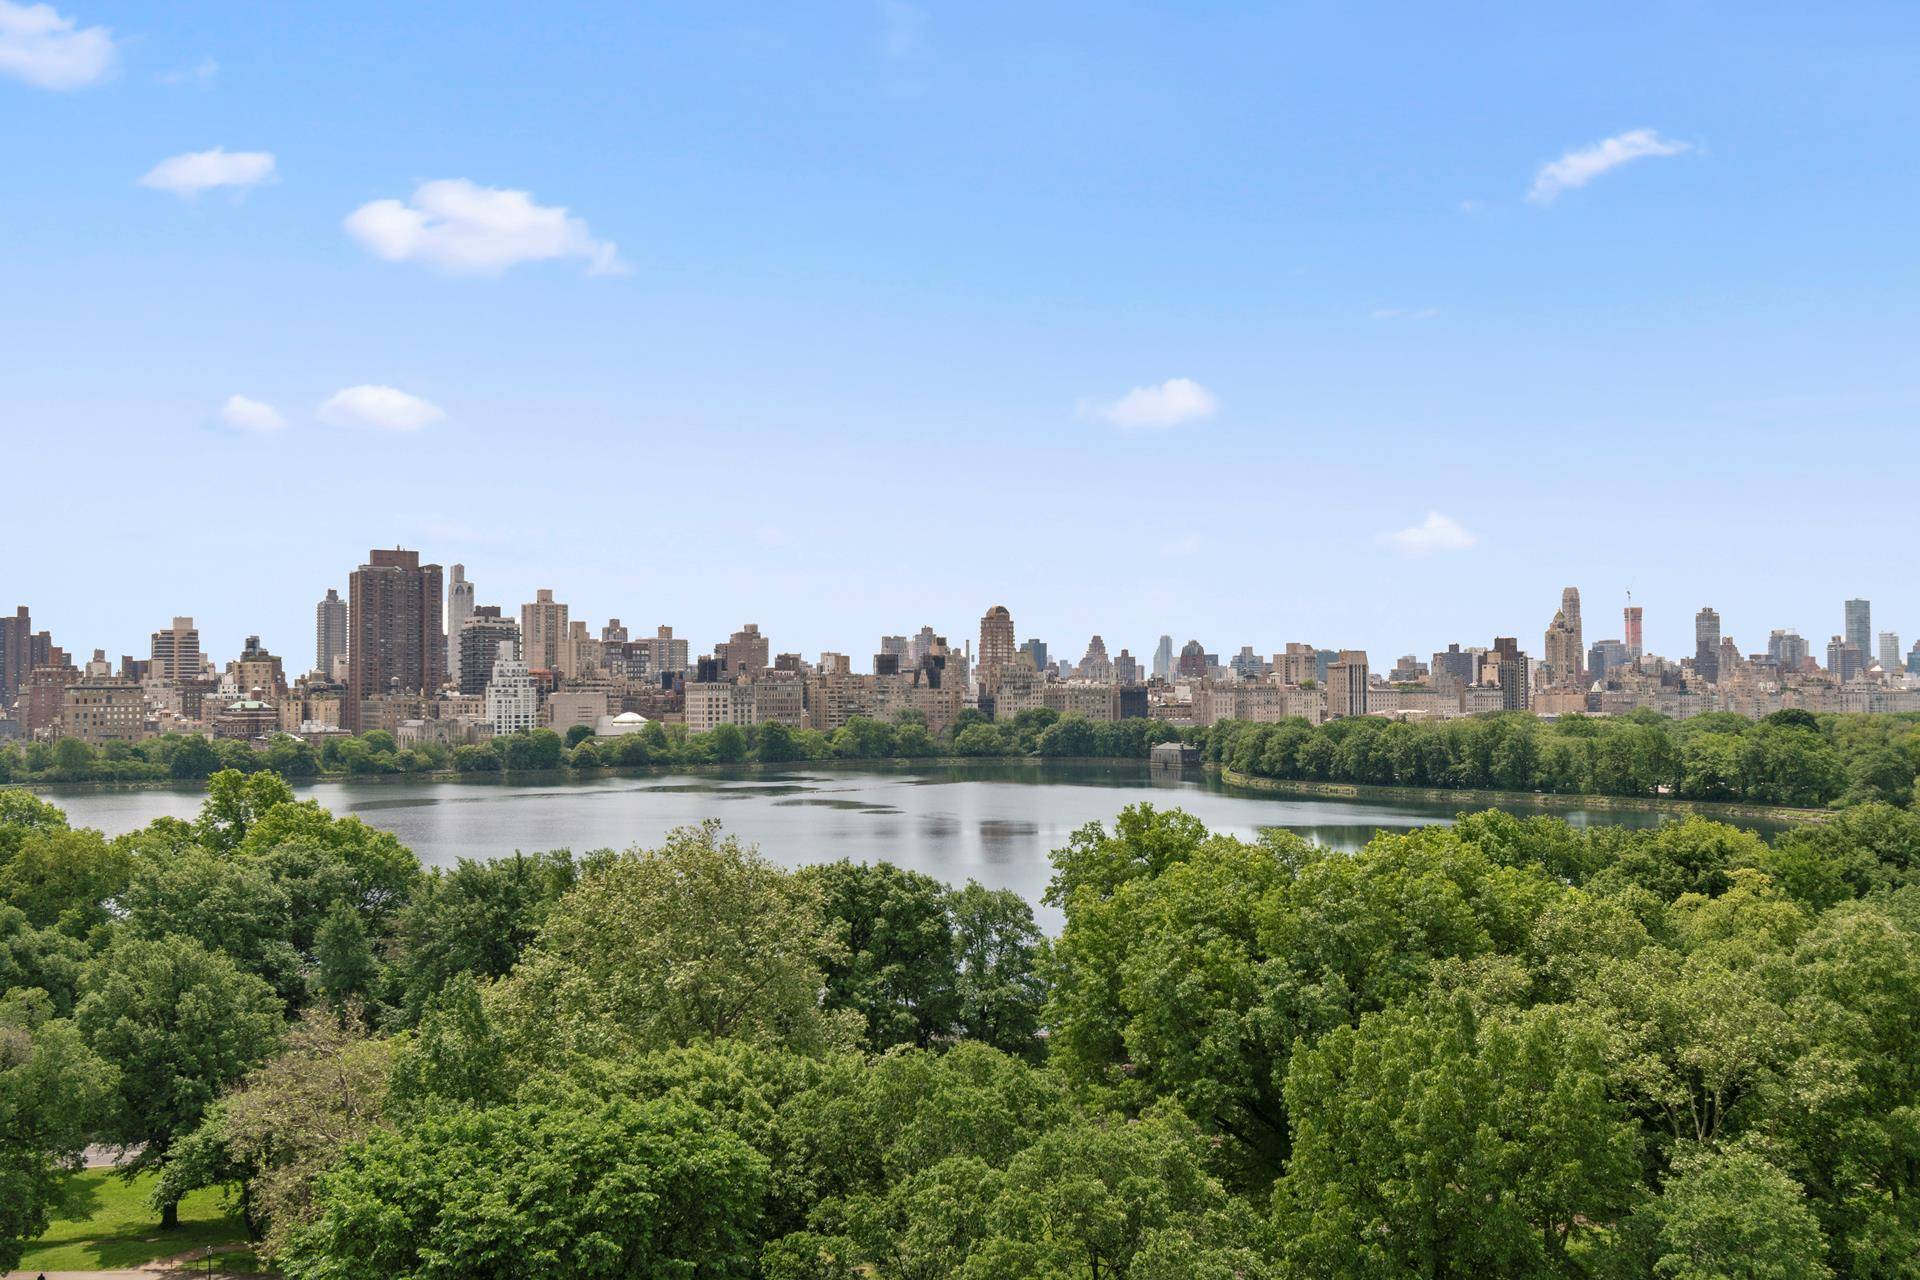 Unparalleled views of the reservoir, Central Park and beyond greet you from this 15th floor perch.